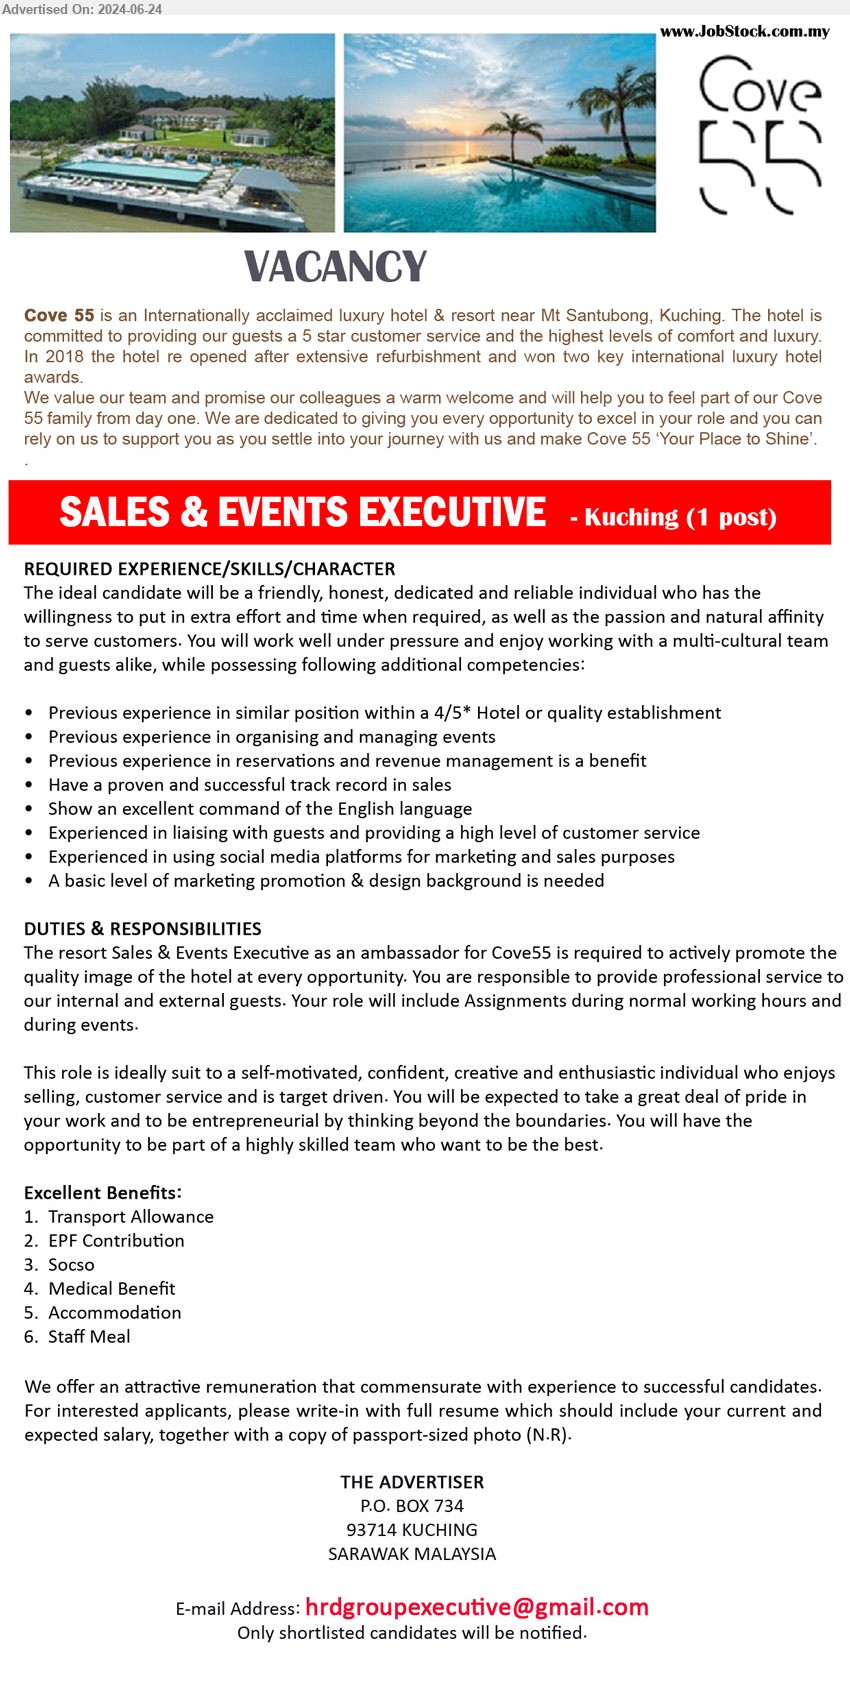 COVE 55 - SALES & EVENTS EXECUTIVE  (Kuching), Have a proven and successful track record in sales, Experienced in liaising with guests and providing a high level of customer service,...
Email resume to ...